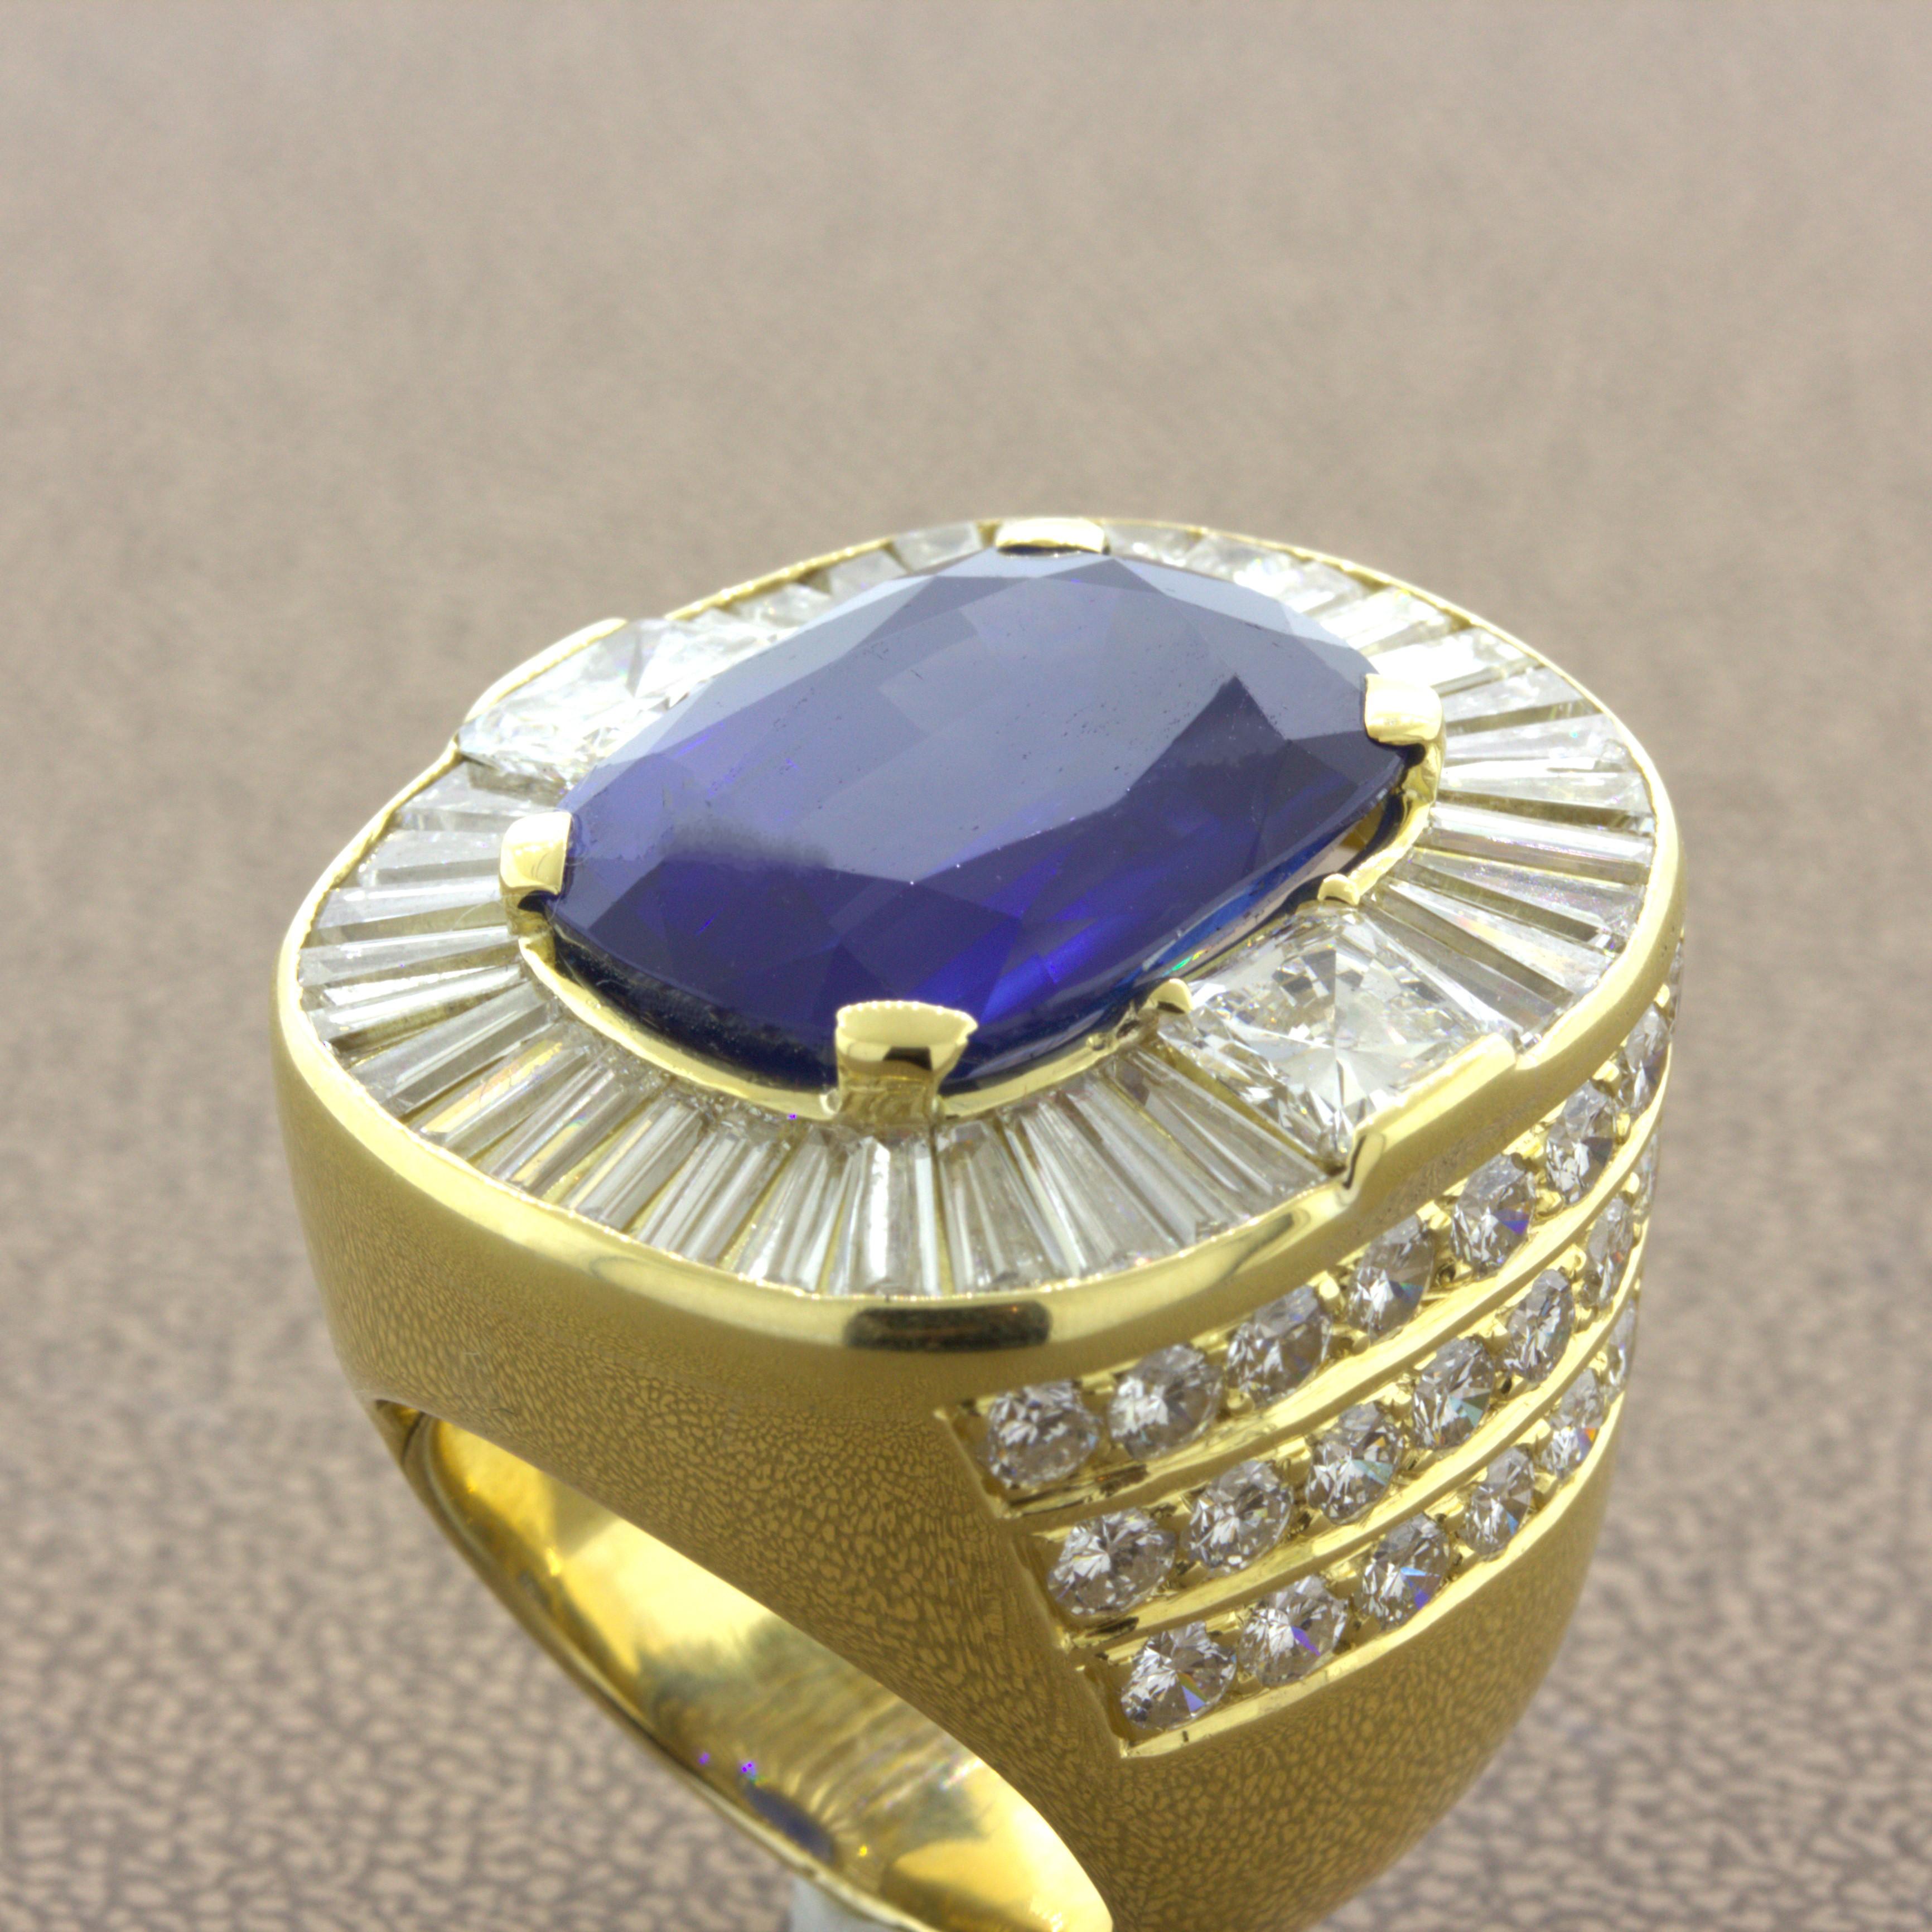 19.36 Carat Ceylon Sapphire Diamond 18K Yellow Gold Cocktail Ring, GIA Certified For Sale 1